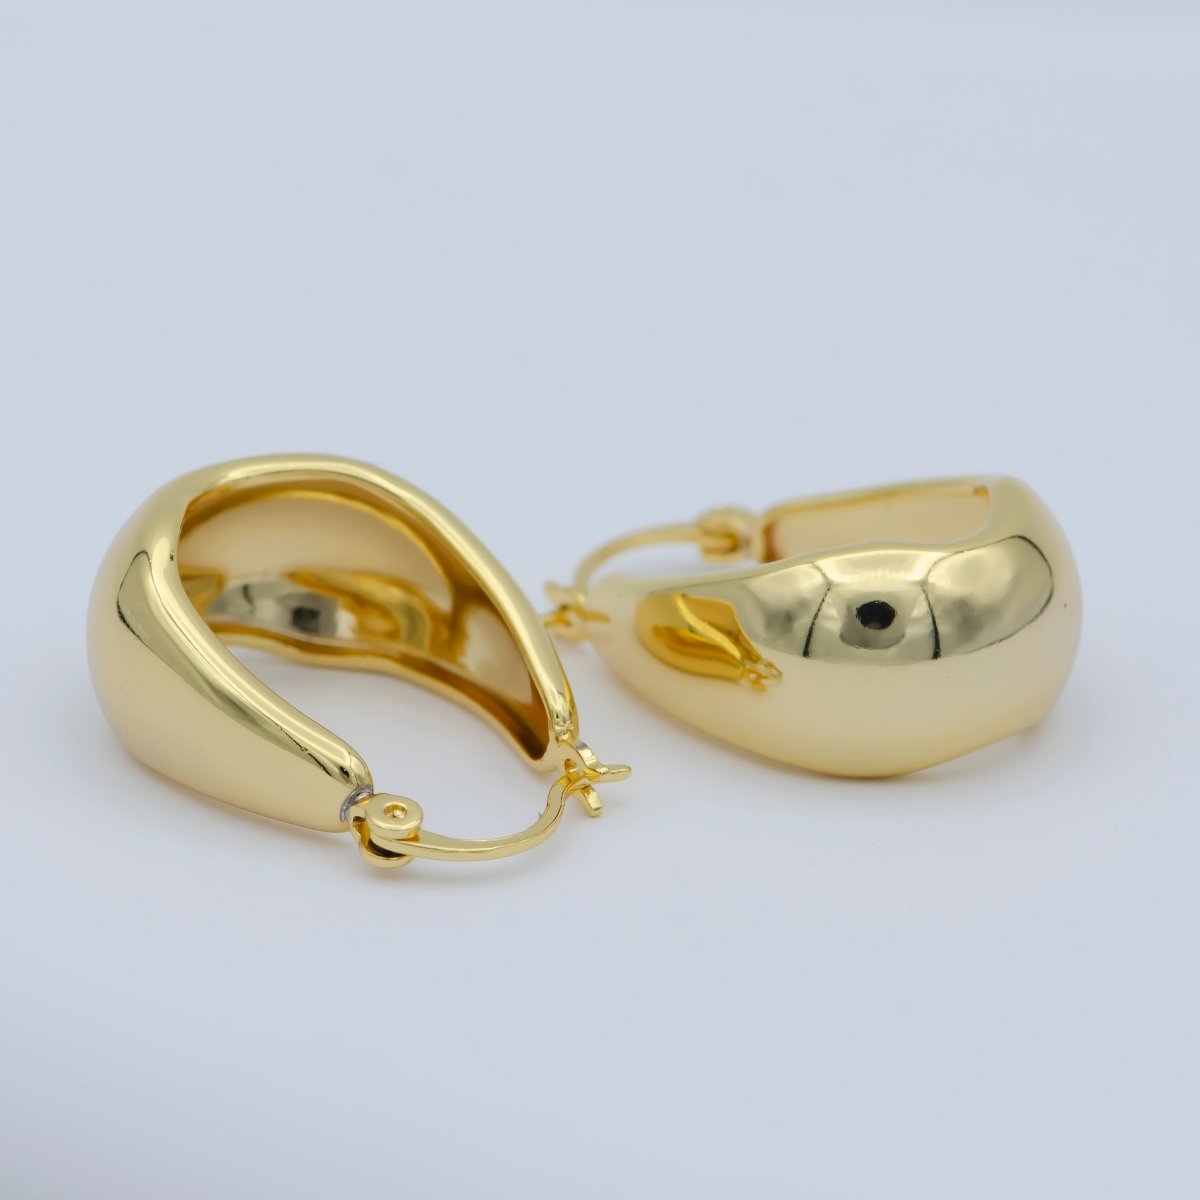 24k Gold Filled Thick Hoops - Gold Thick Hoop Earrings - Chunky Thick Hoops - Light Weight Hoops Dome Earring P-264 - DLUXCA